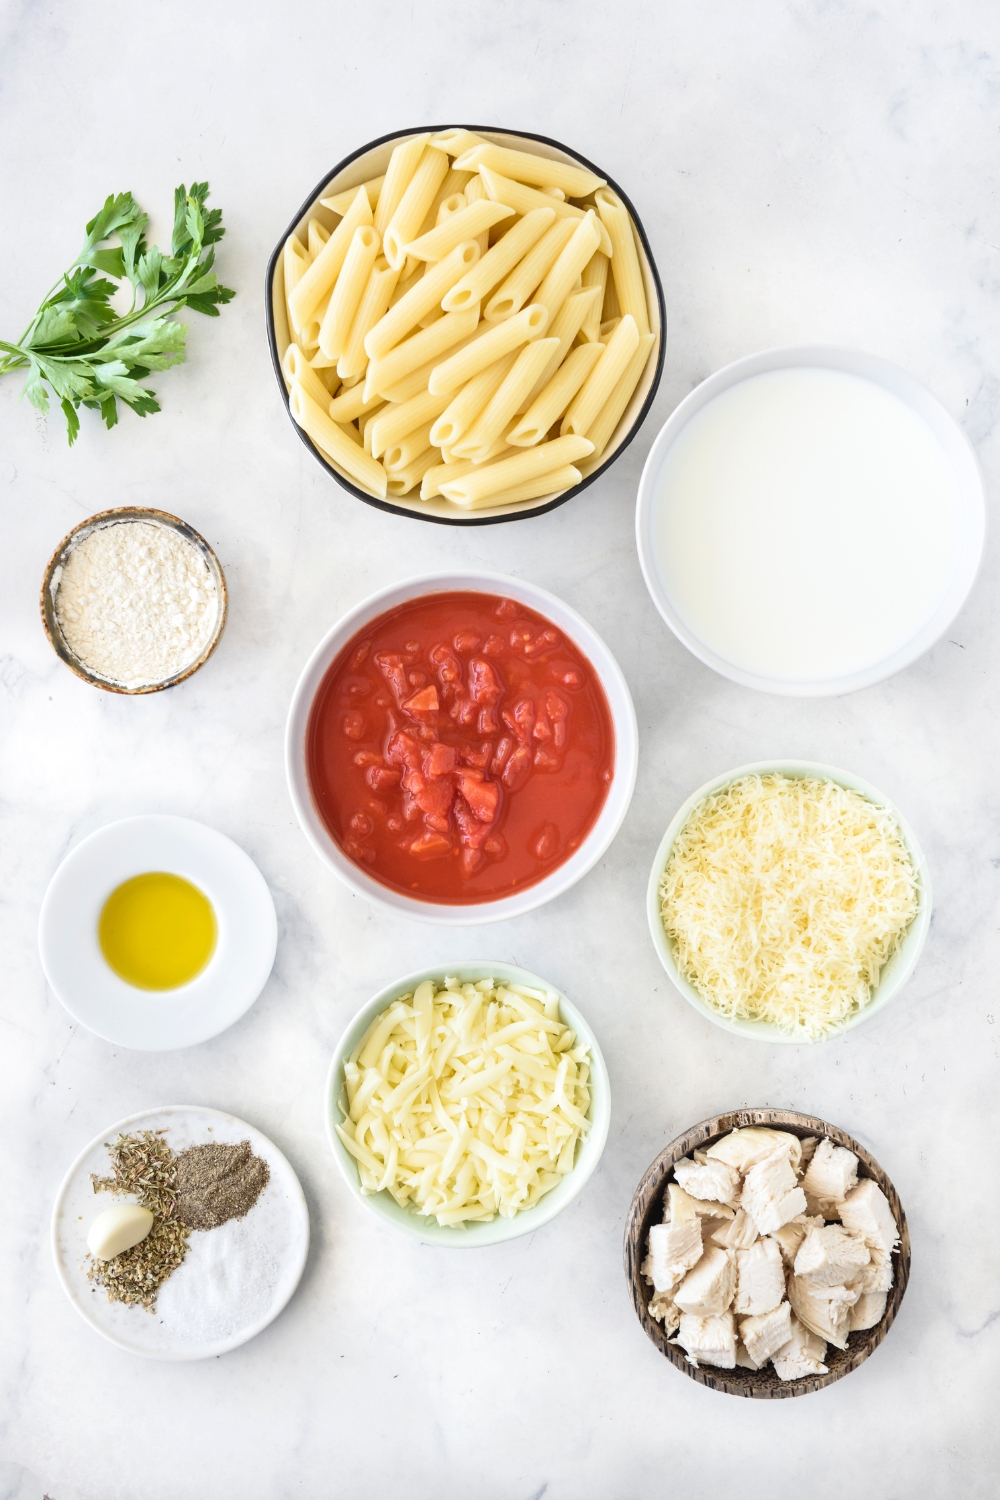 An assortment of ingredients including bowls of dried pasta, red sauce, shredded cheese, diced chicken, oil, and milk.